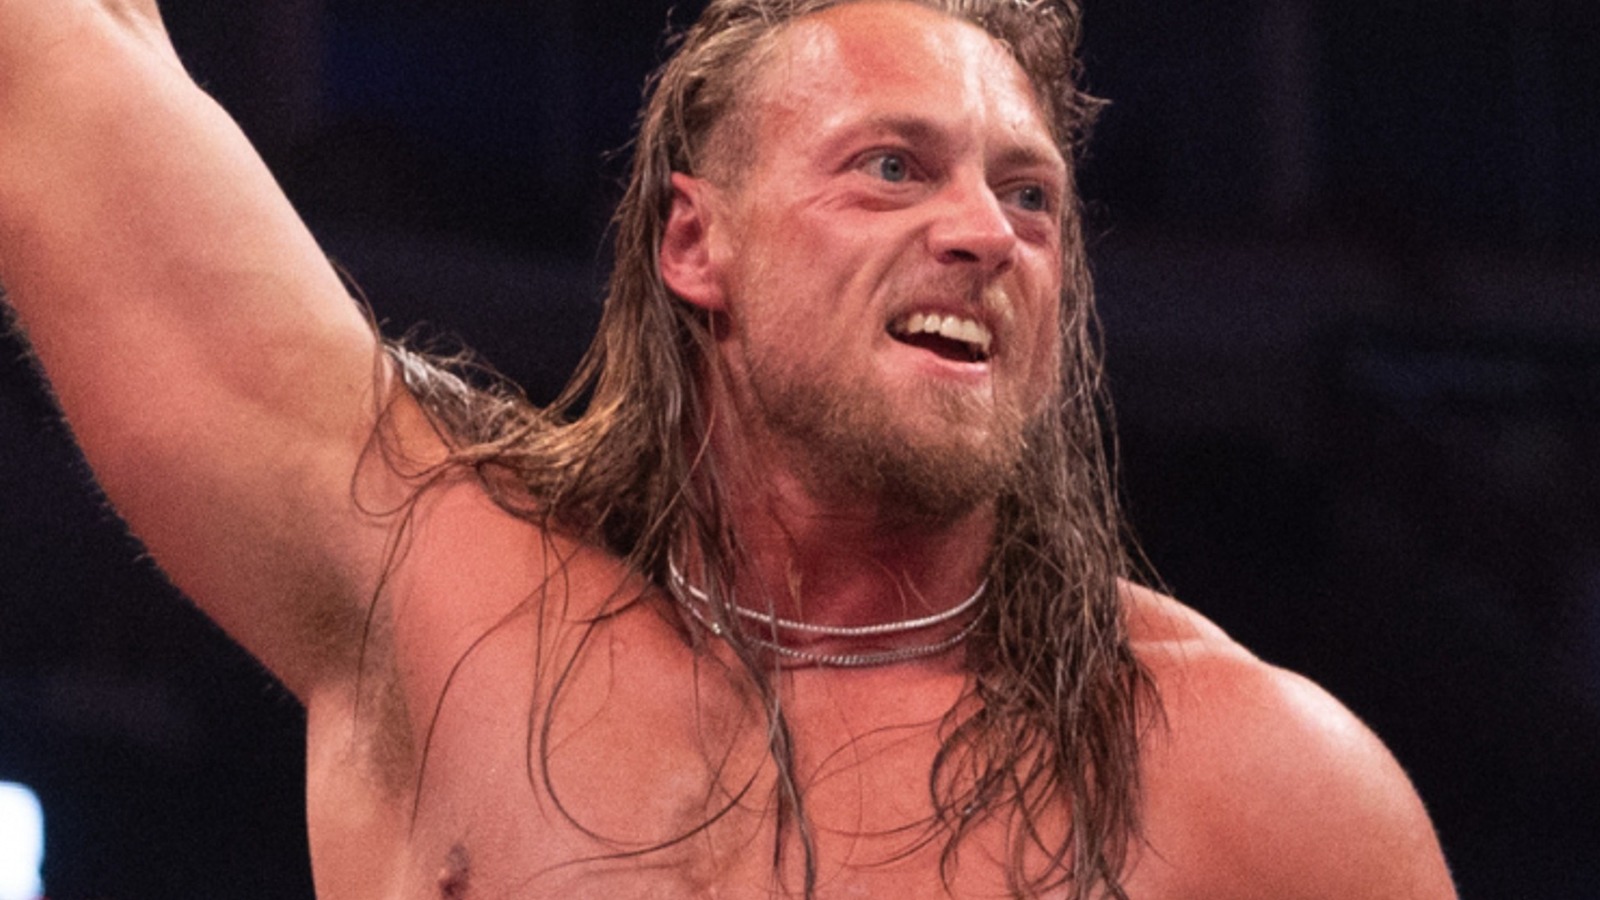 aew-s-big-bill-discusses-the-origins-of-his-character-s-name